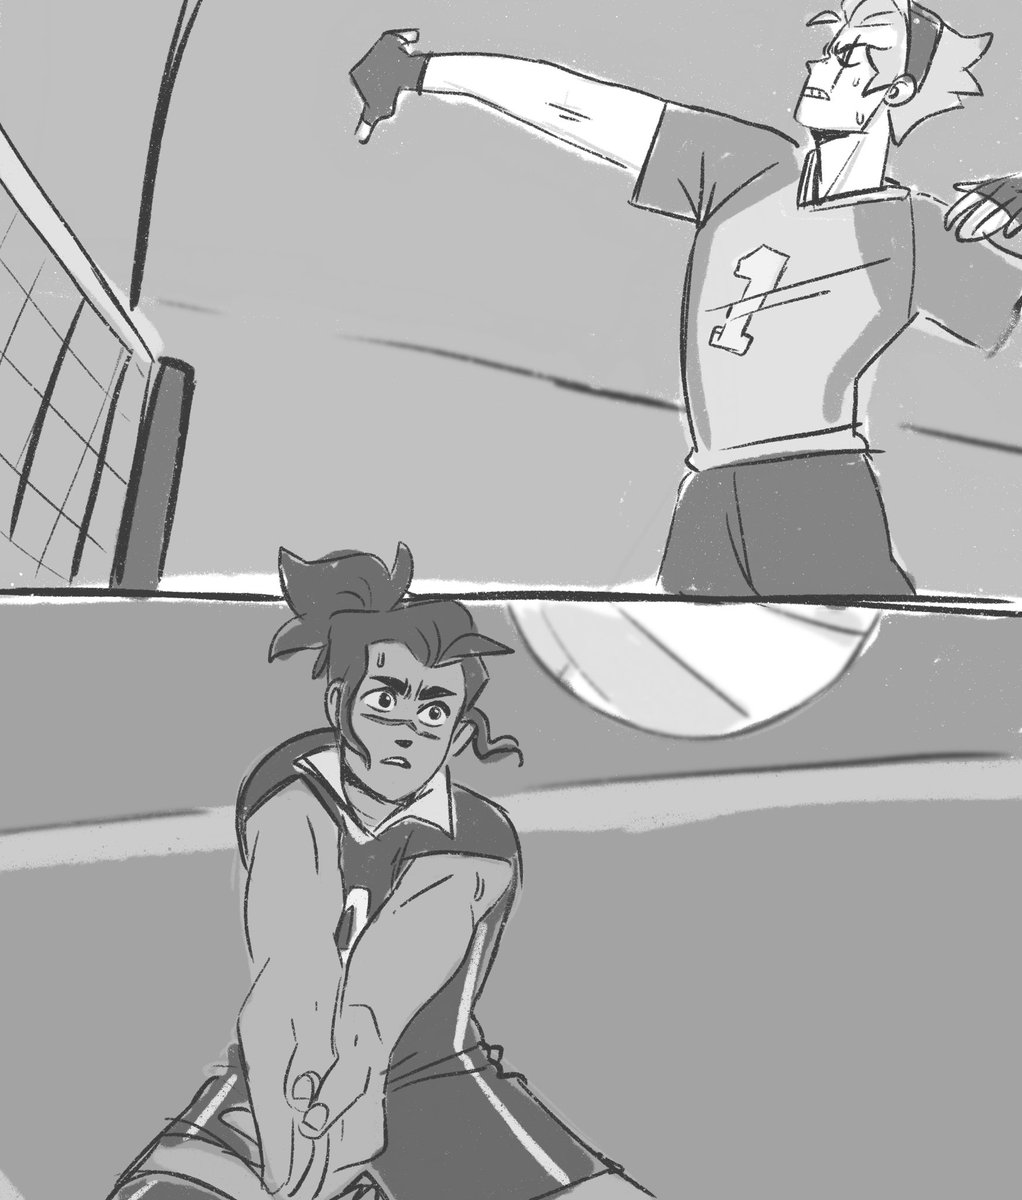 day 25: competitive sports (yeah we all saw this one coming hey)
#KakaIruMonth2021 